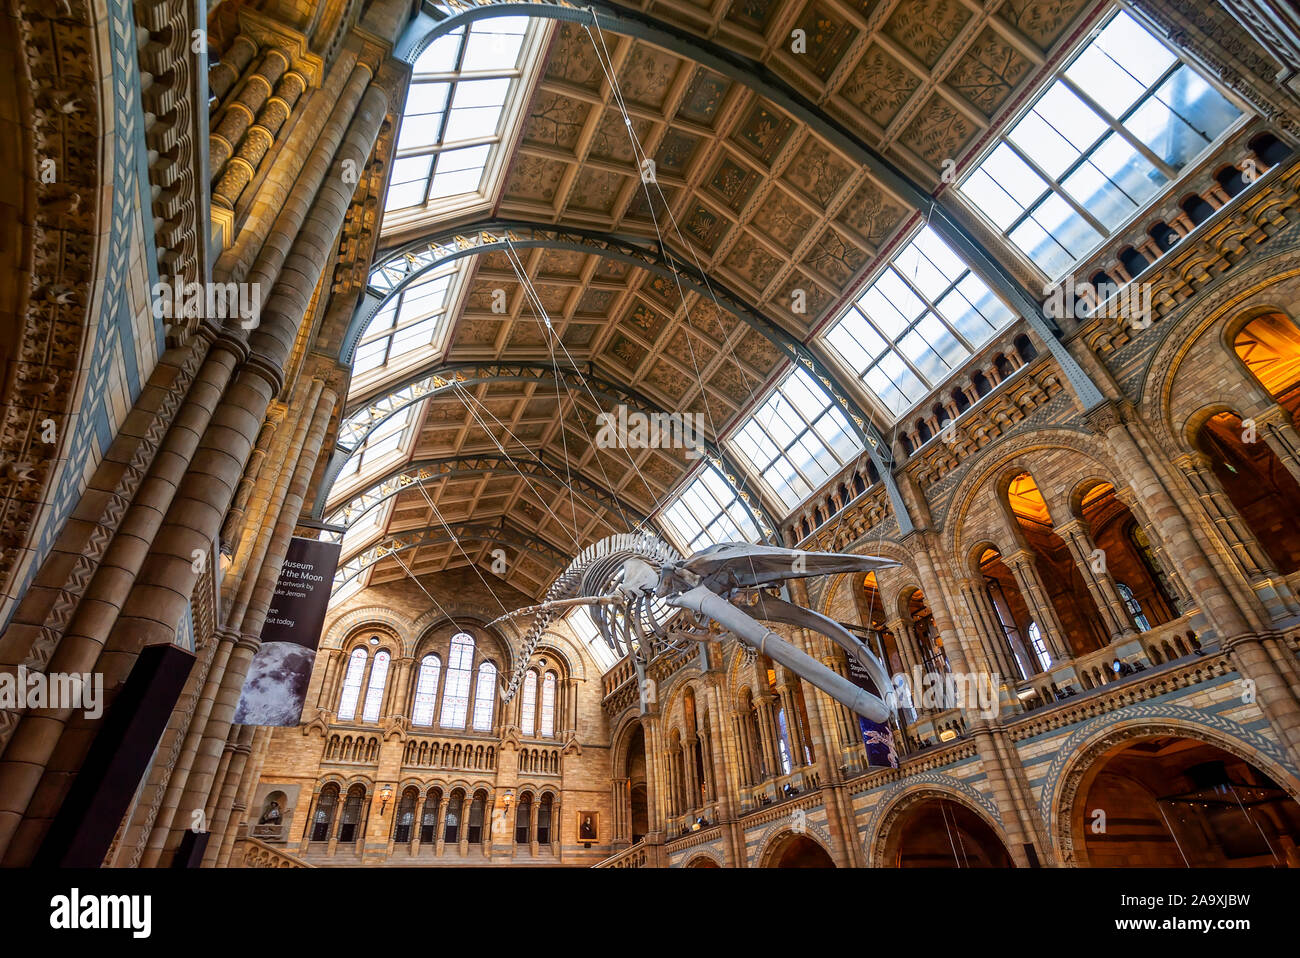 London, UK. Hall of Natural historical museum. Stock Photo